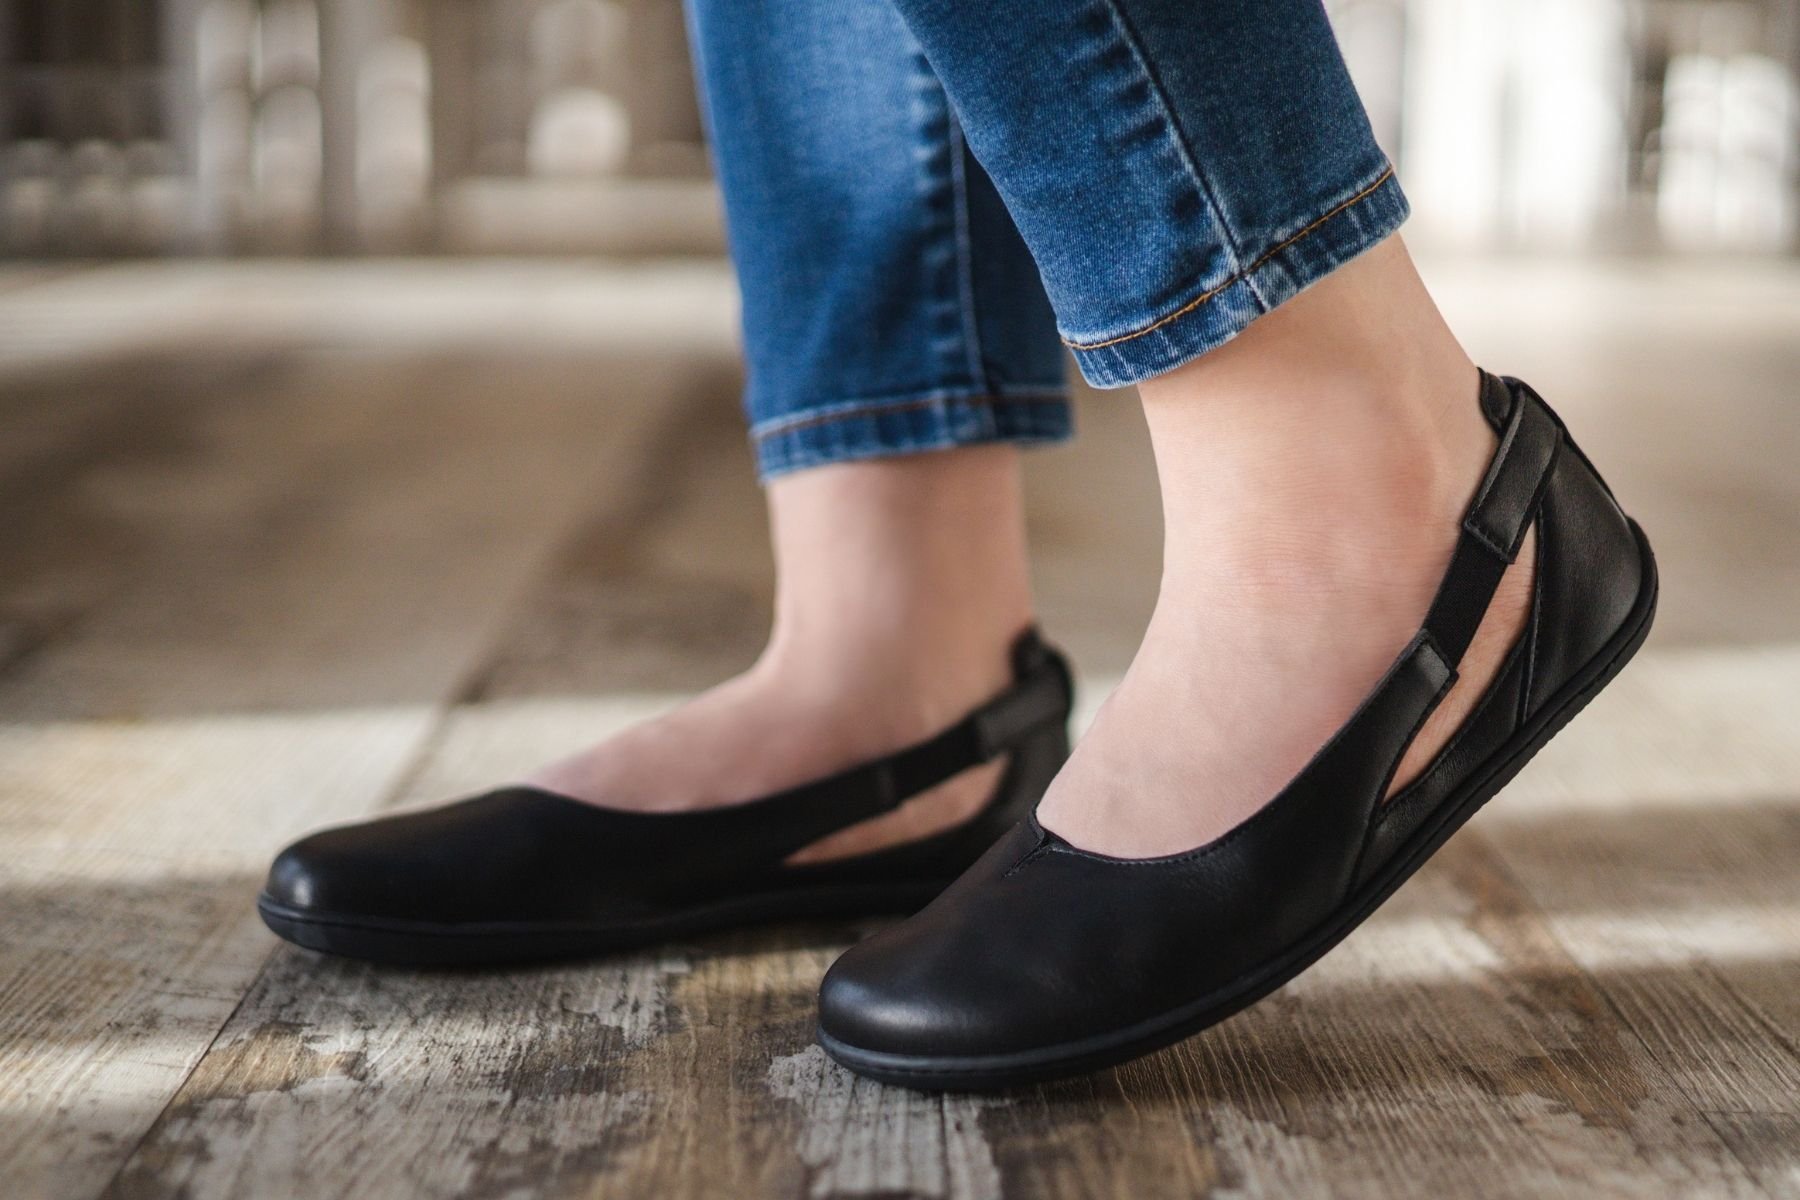 These ballet flats from Amazon are cozy chic and lightweight